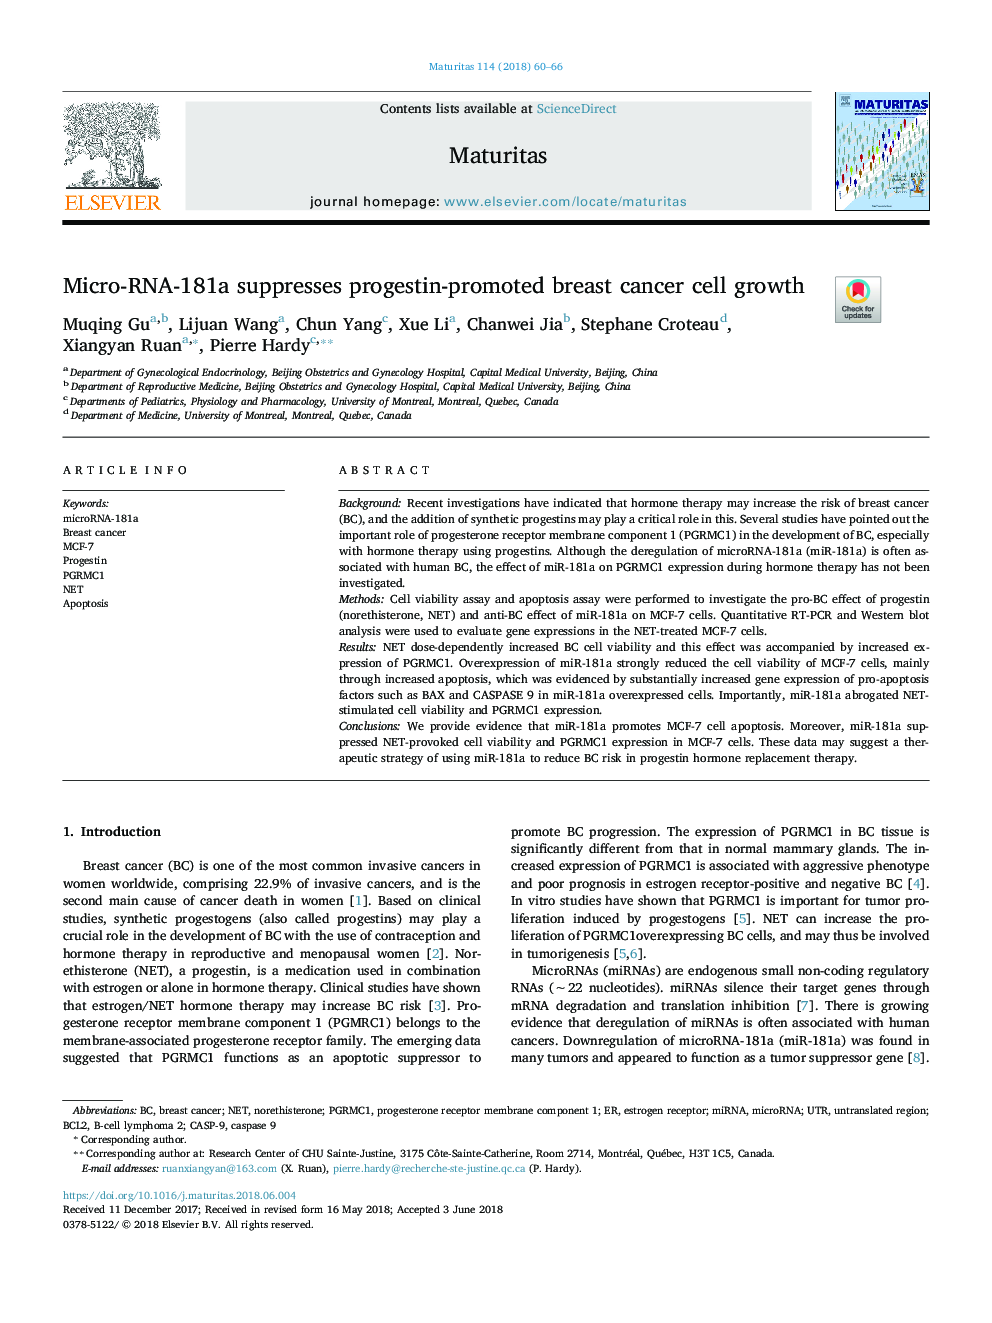 Micro-RNA-181a suppresses progestin-promoted breast cancer cell growth